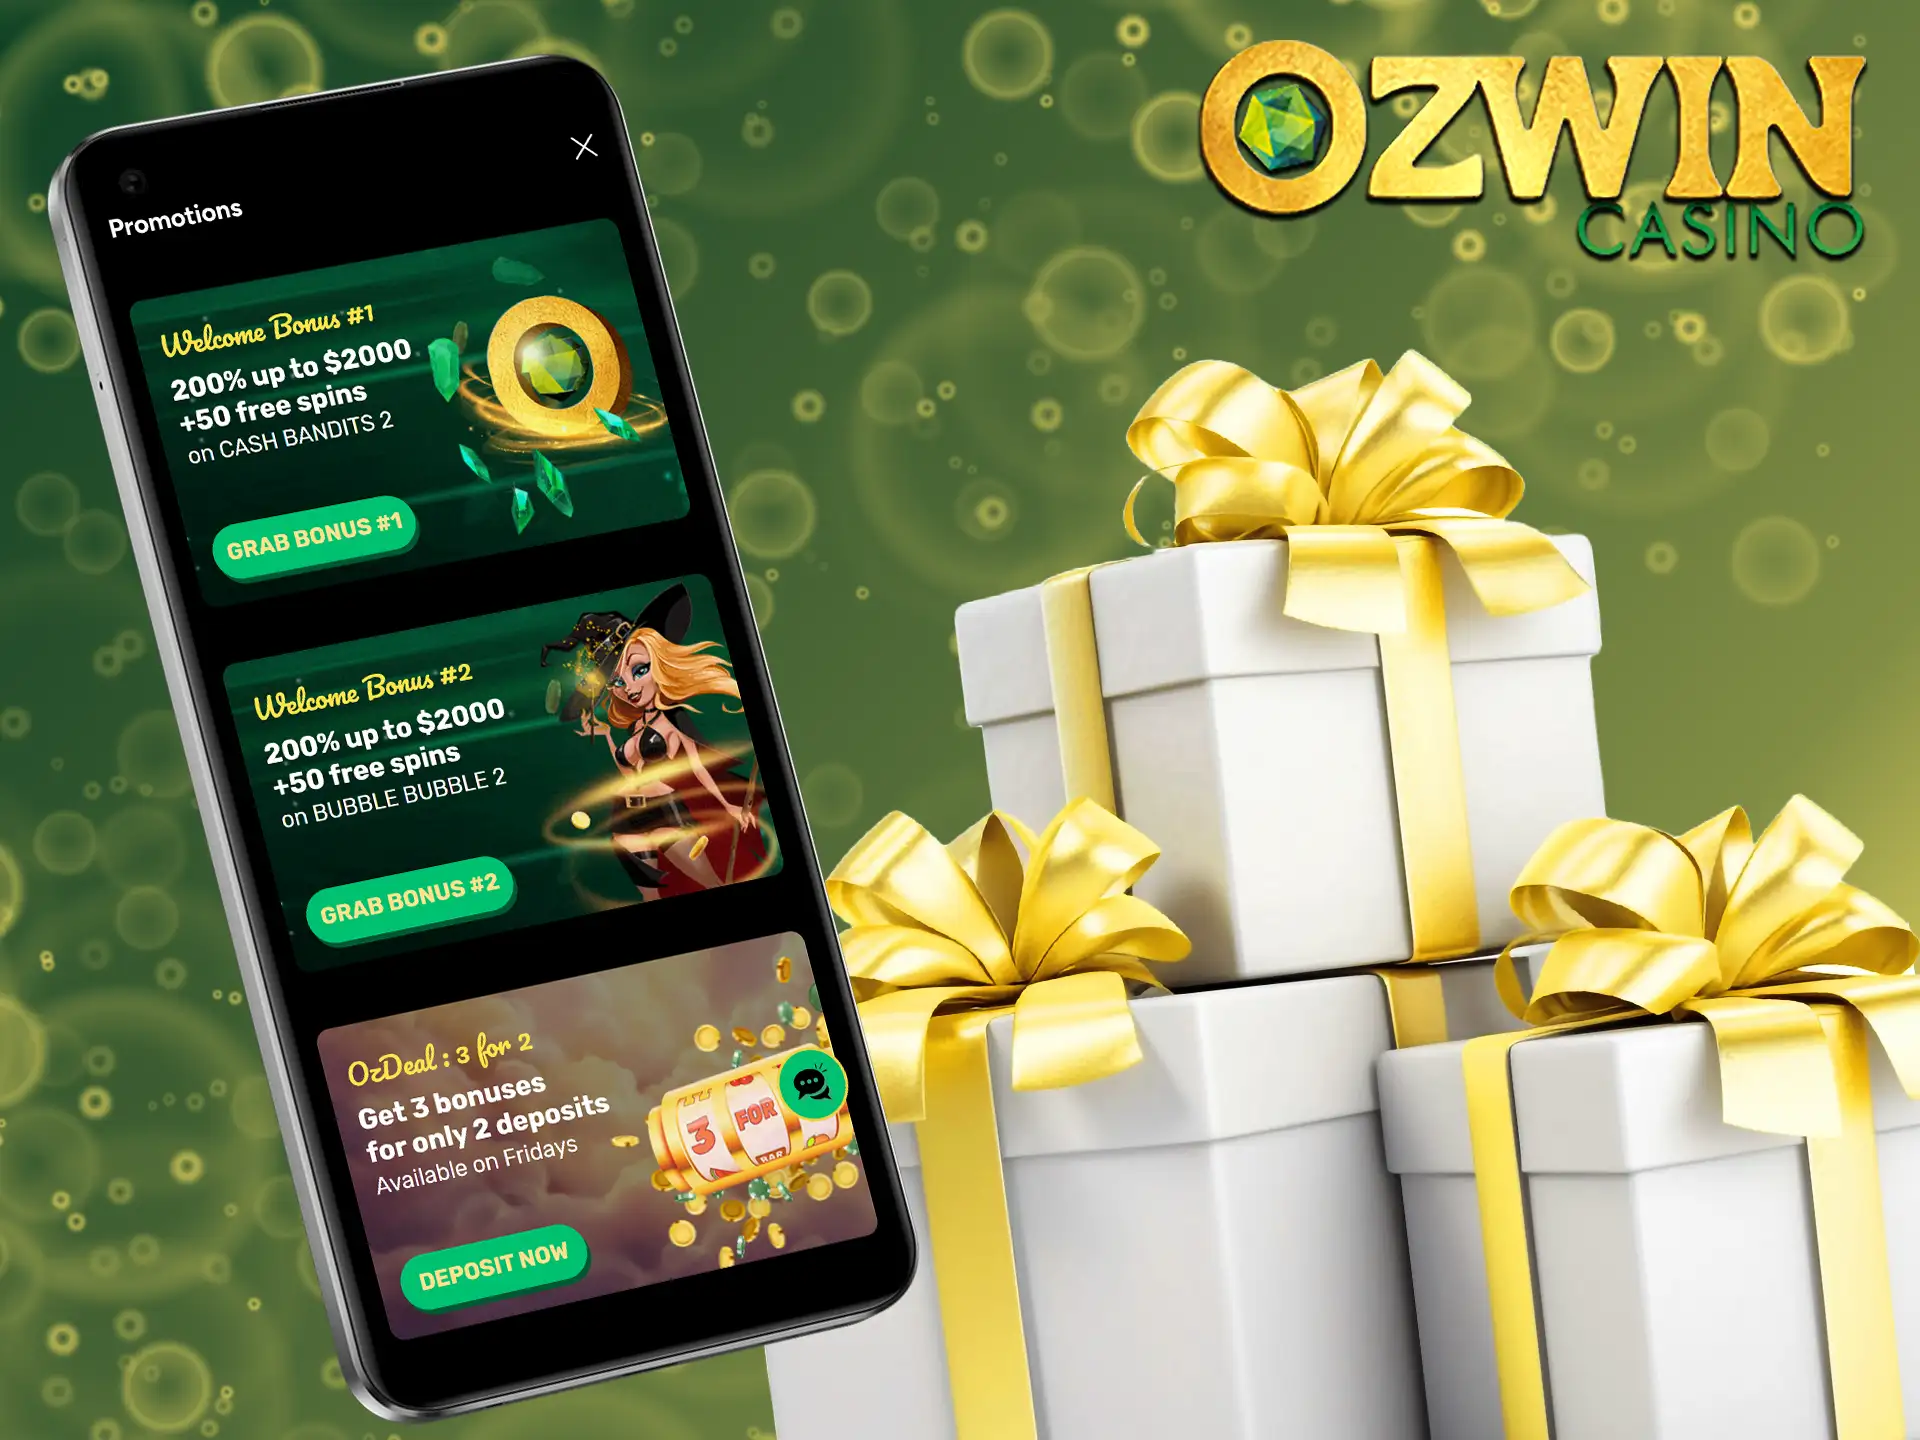 New players at Ozwin casino are greeted with a generous bonus!